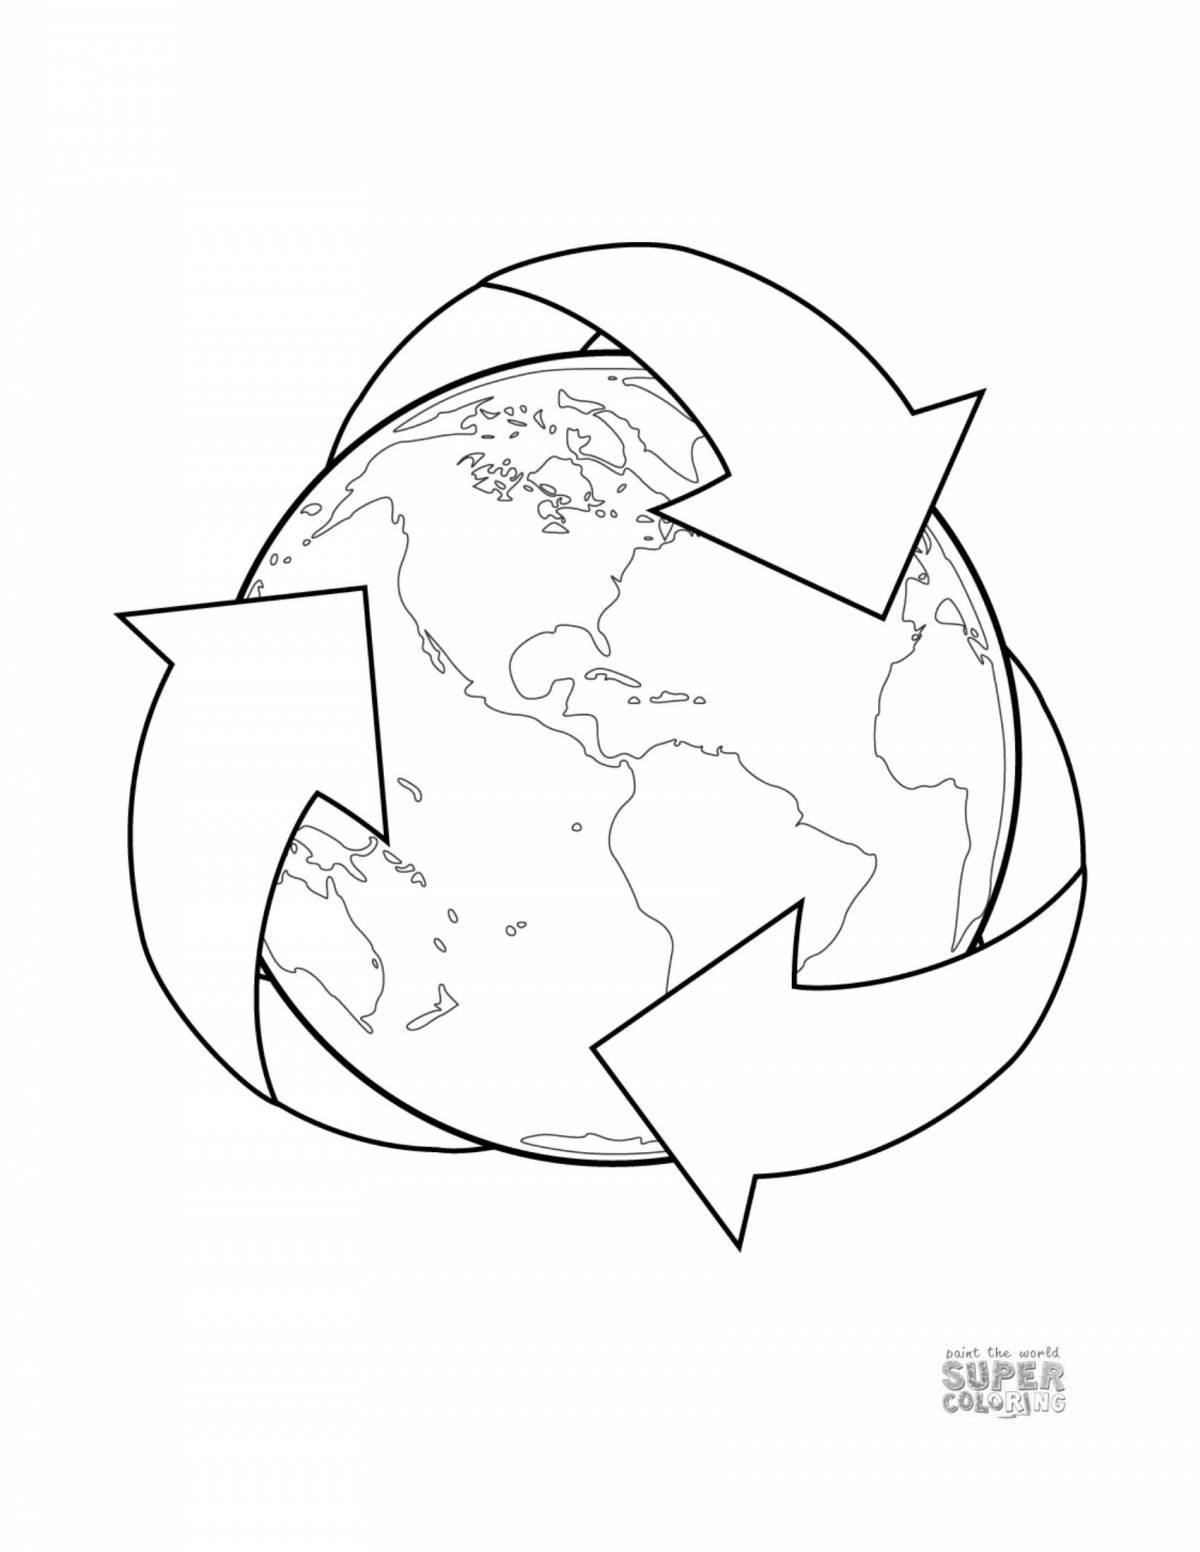 Great ecological drawing